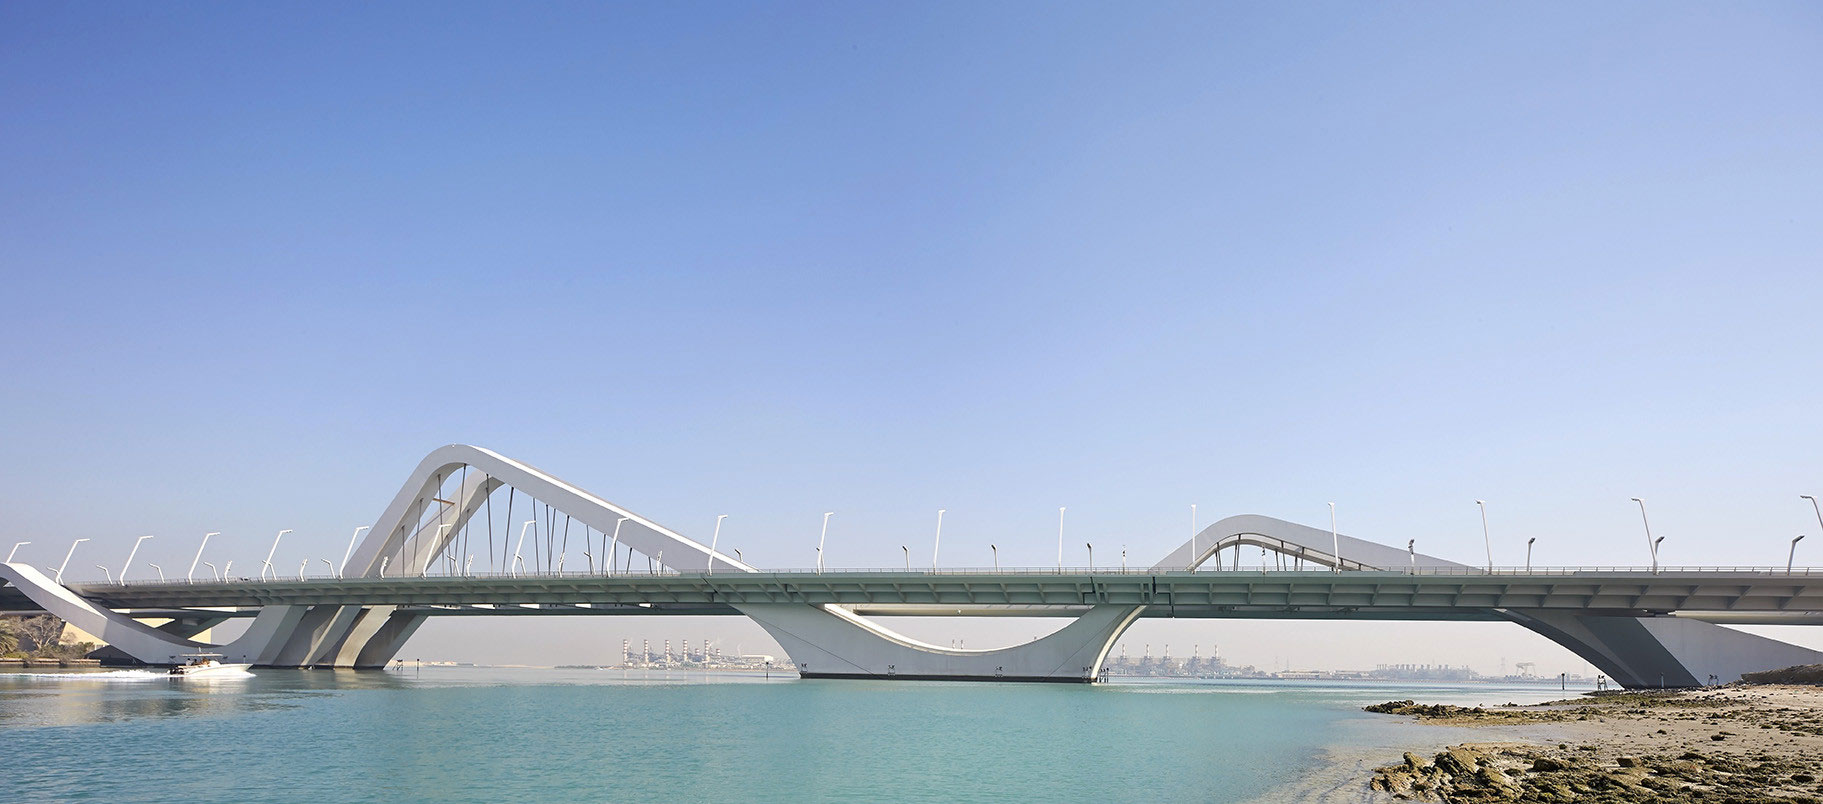 Sheikh-Zayed-Bridge1 The Zaha Hadid buildings that are awe inspiring (A must see)